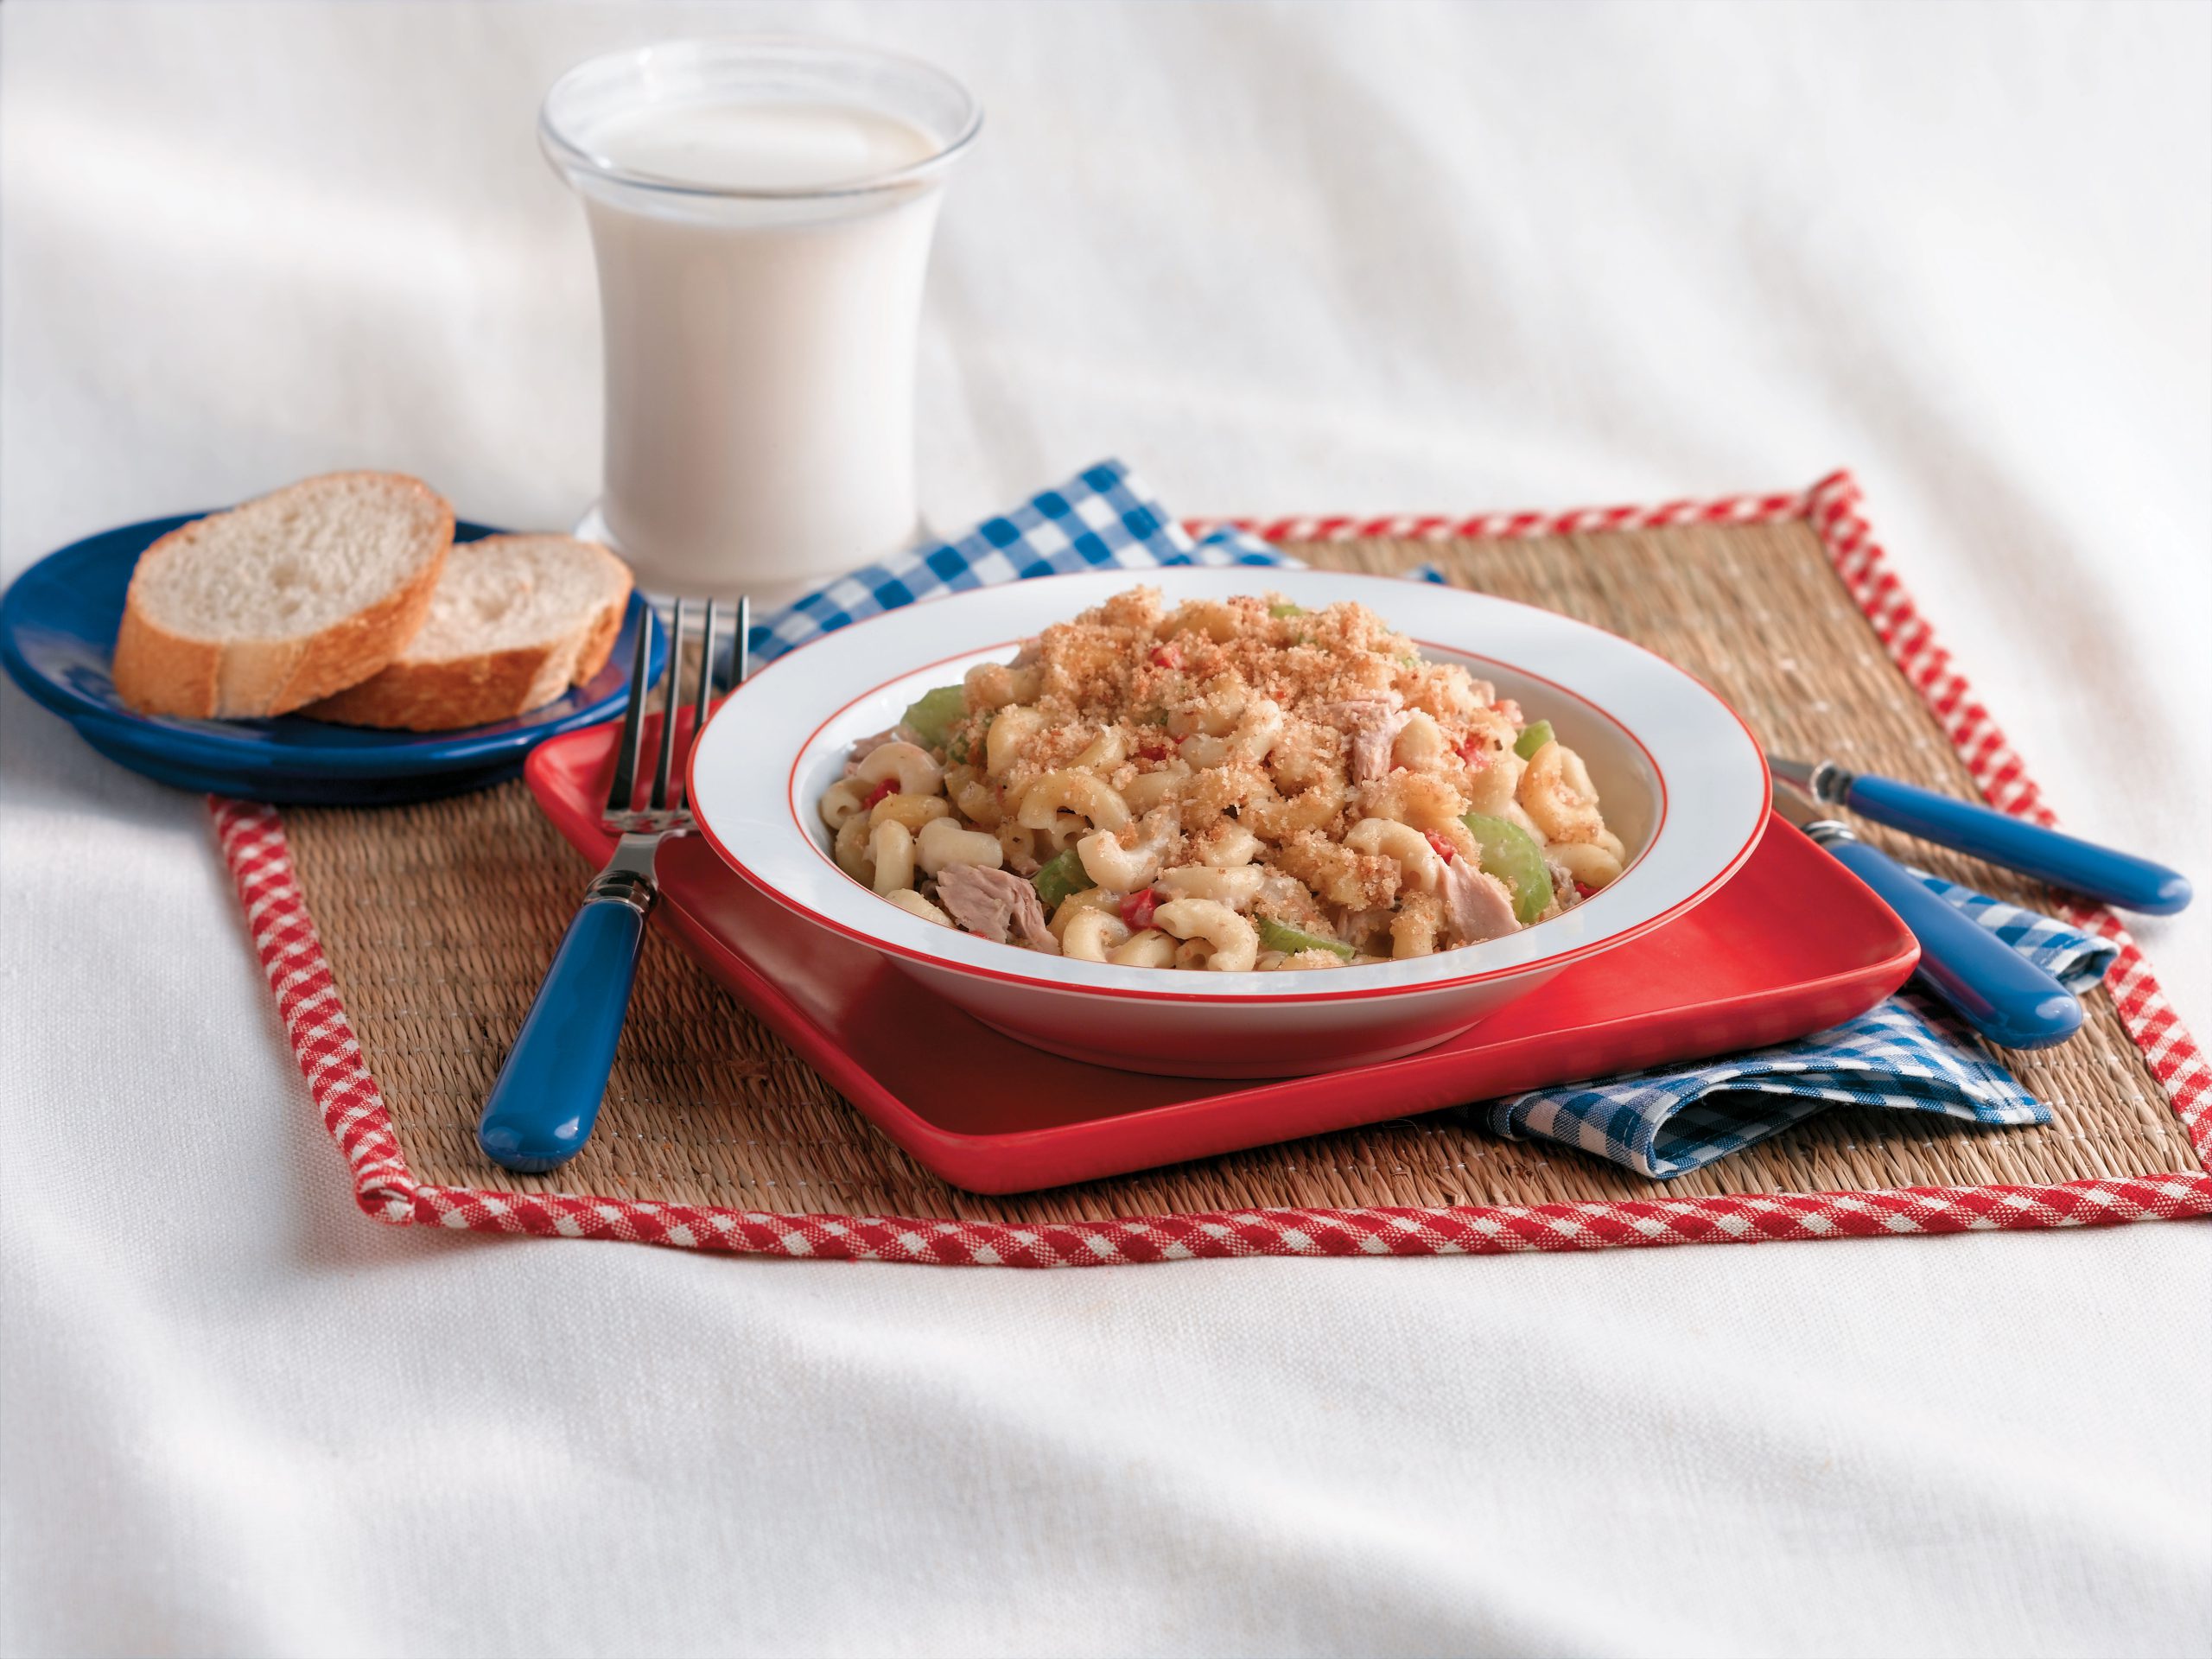 Picnic macaroni salad with elbows, celery, and green peppers, topped with bread crumbs